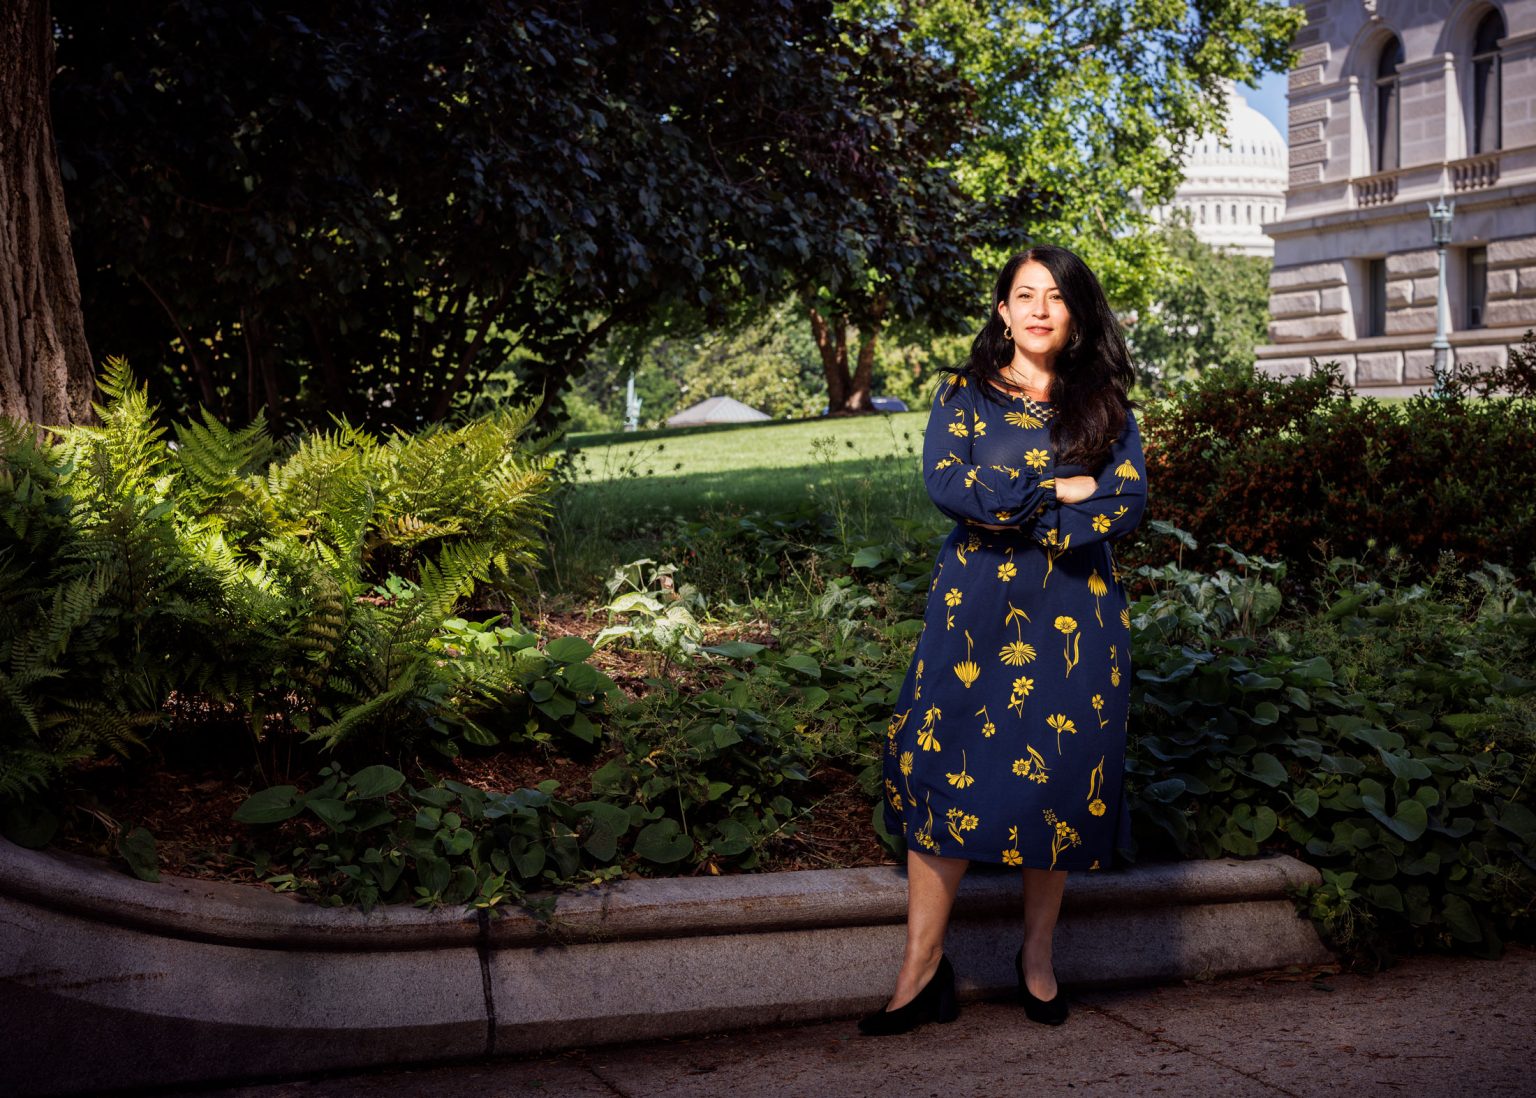 Ada Limón is the nation's 24th US Poet Laureate. Photo provided by Shawn Miller, Library of Congress.